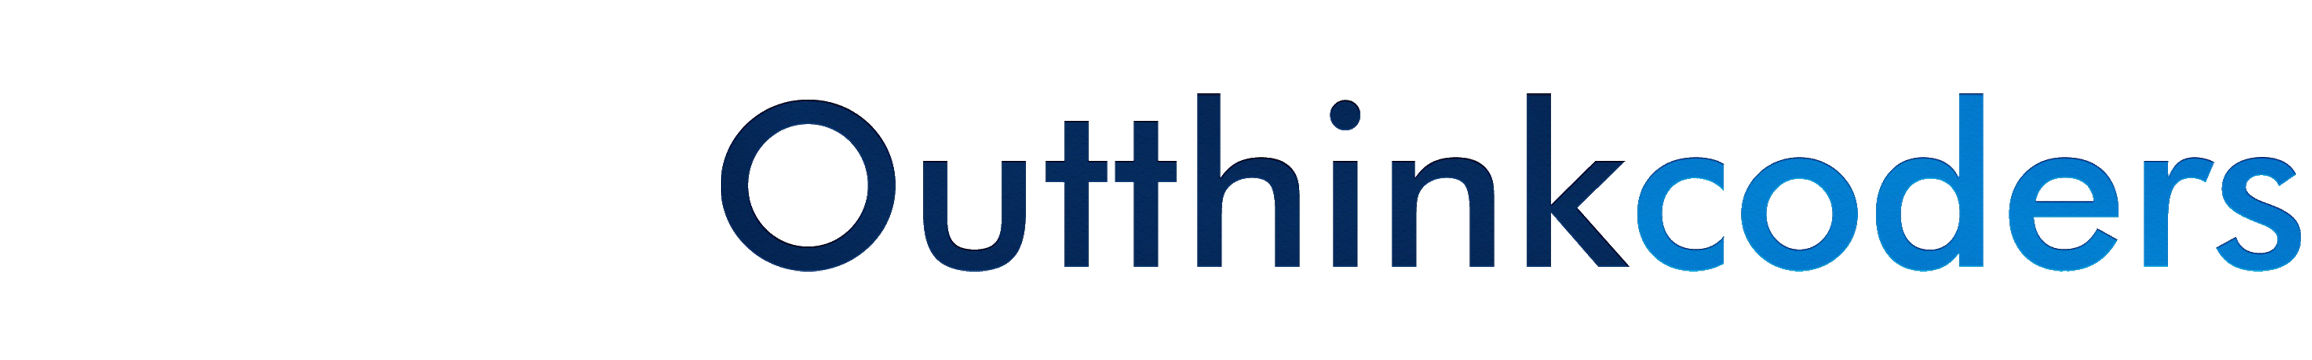 Outthink coders's profile banner